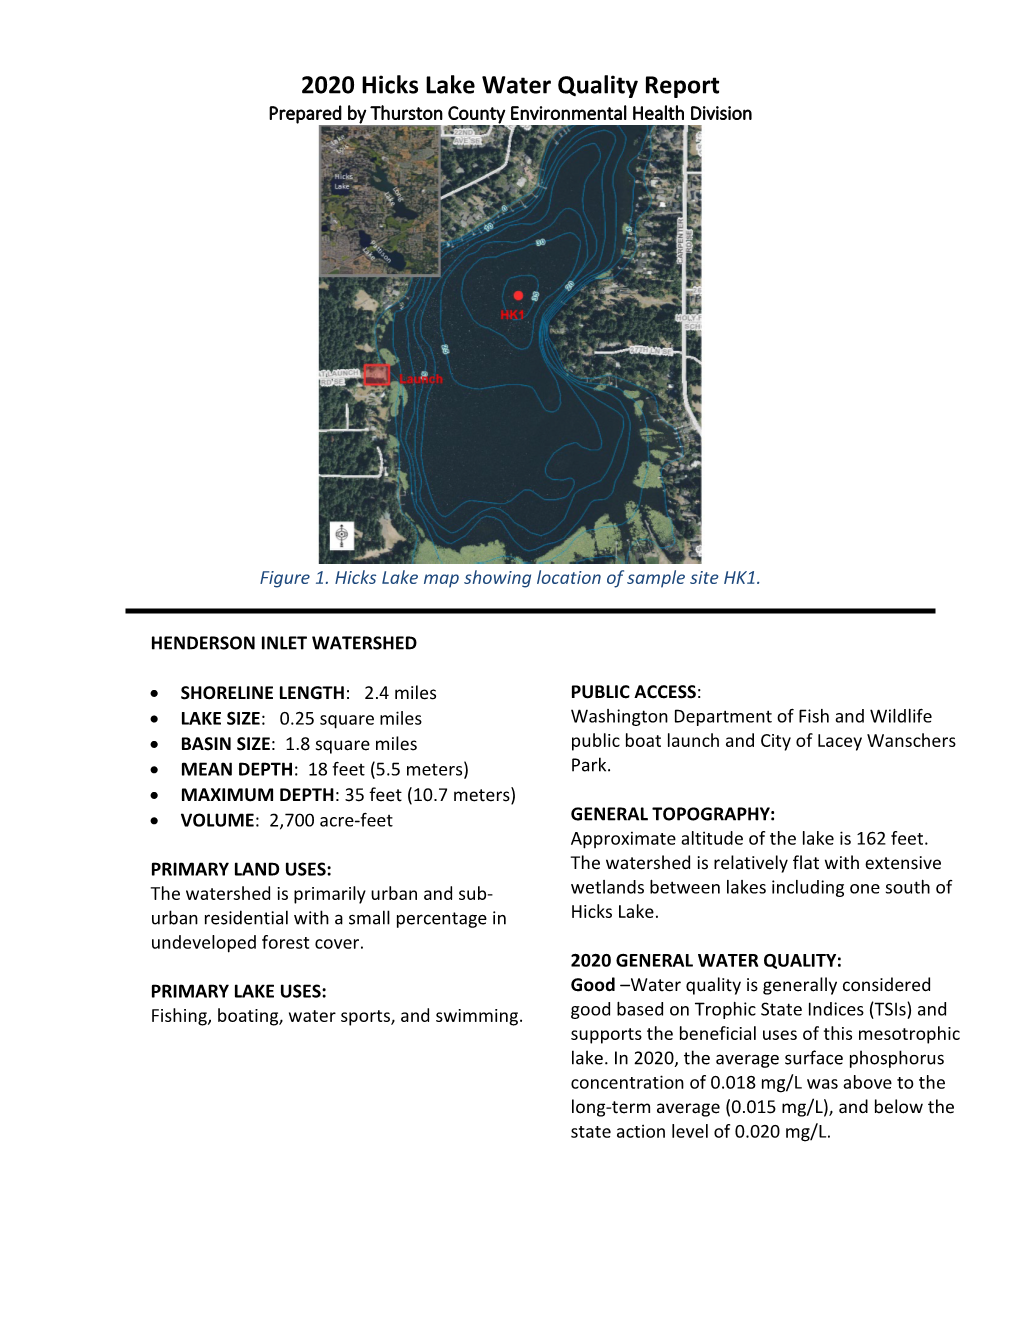 2020 Hicks Lake Water Quality Report Prepared by Thurston County Environmental Health Division